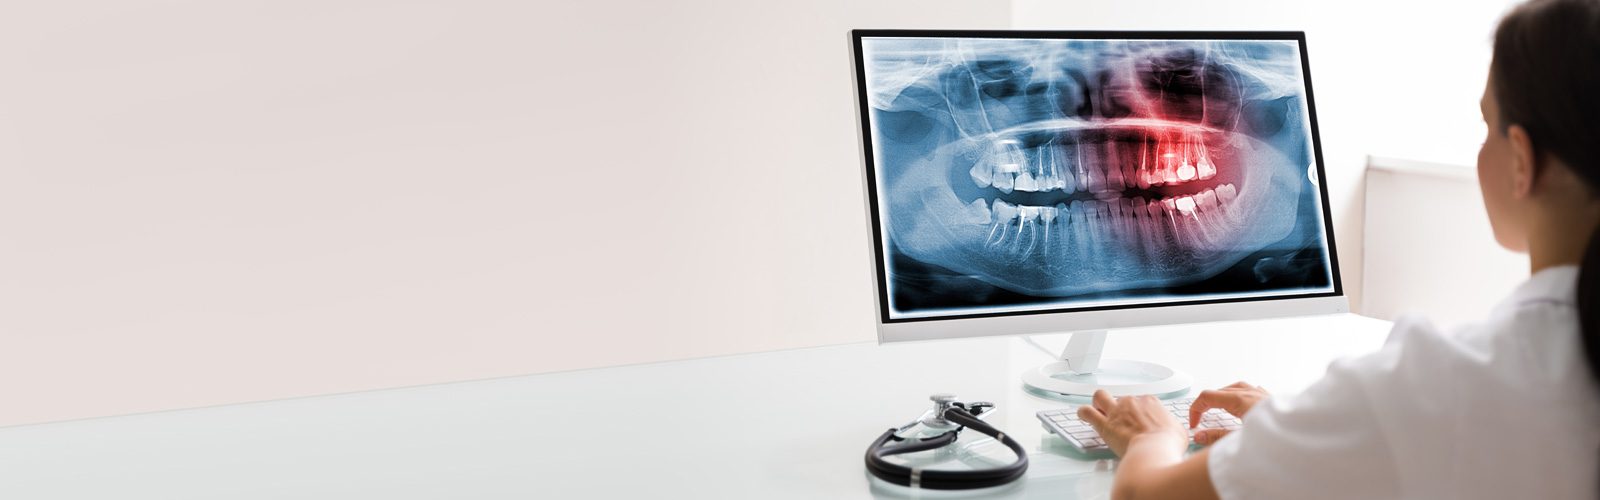 FDA Approves Dental Technology Capable of Reading and Interpreting X-rays